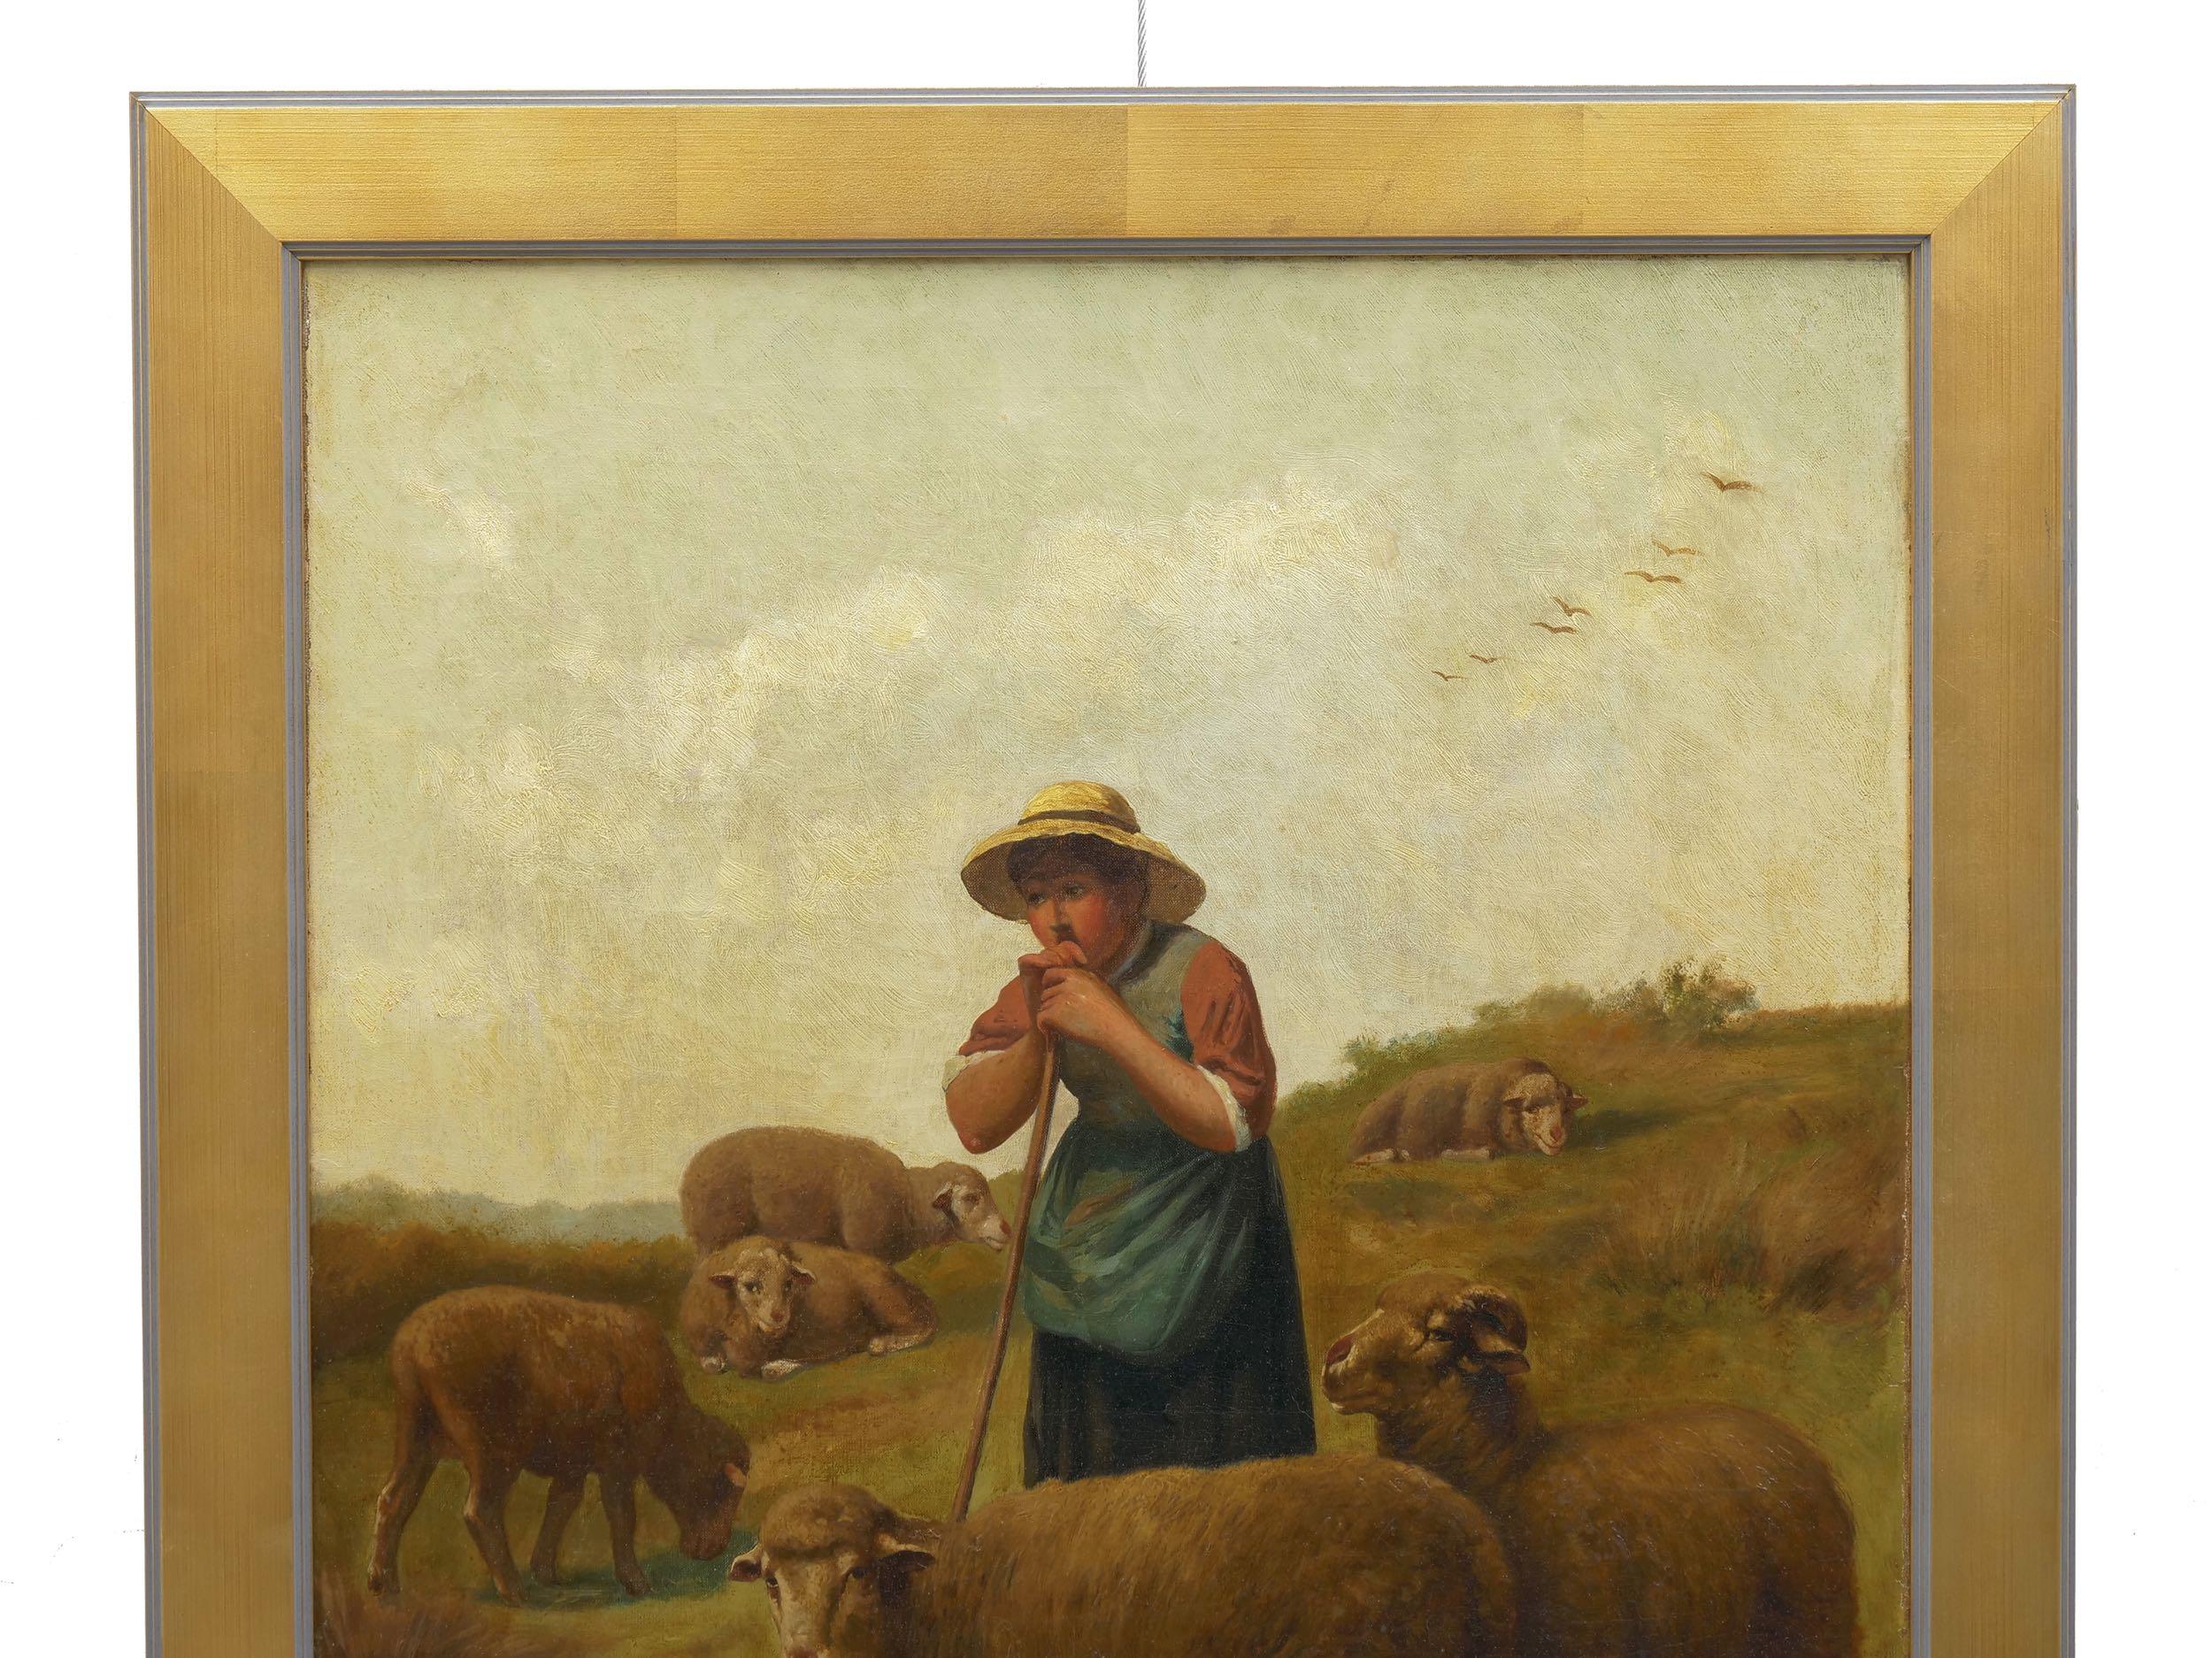 European “Shepherdess and Her Sheep” Antique Oil Painting Signed Franz de Beul, 19th C